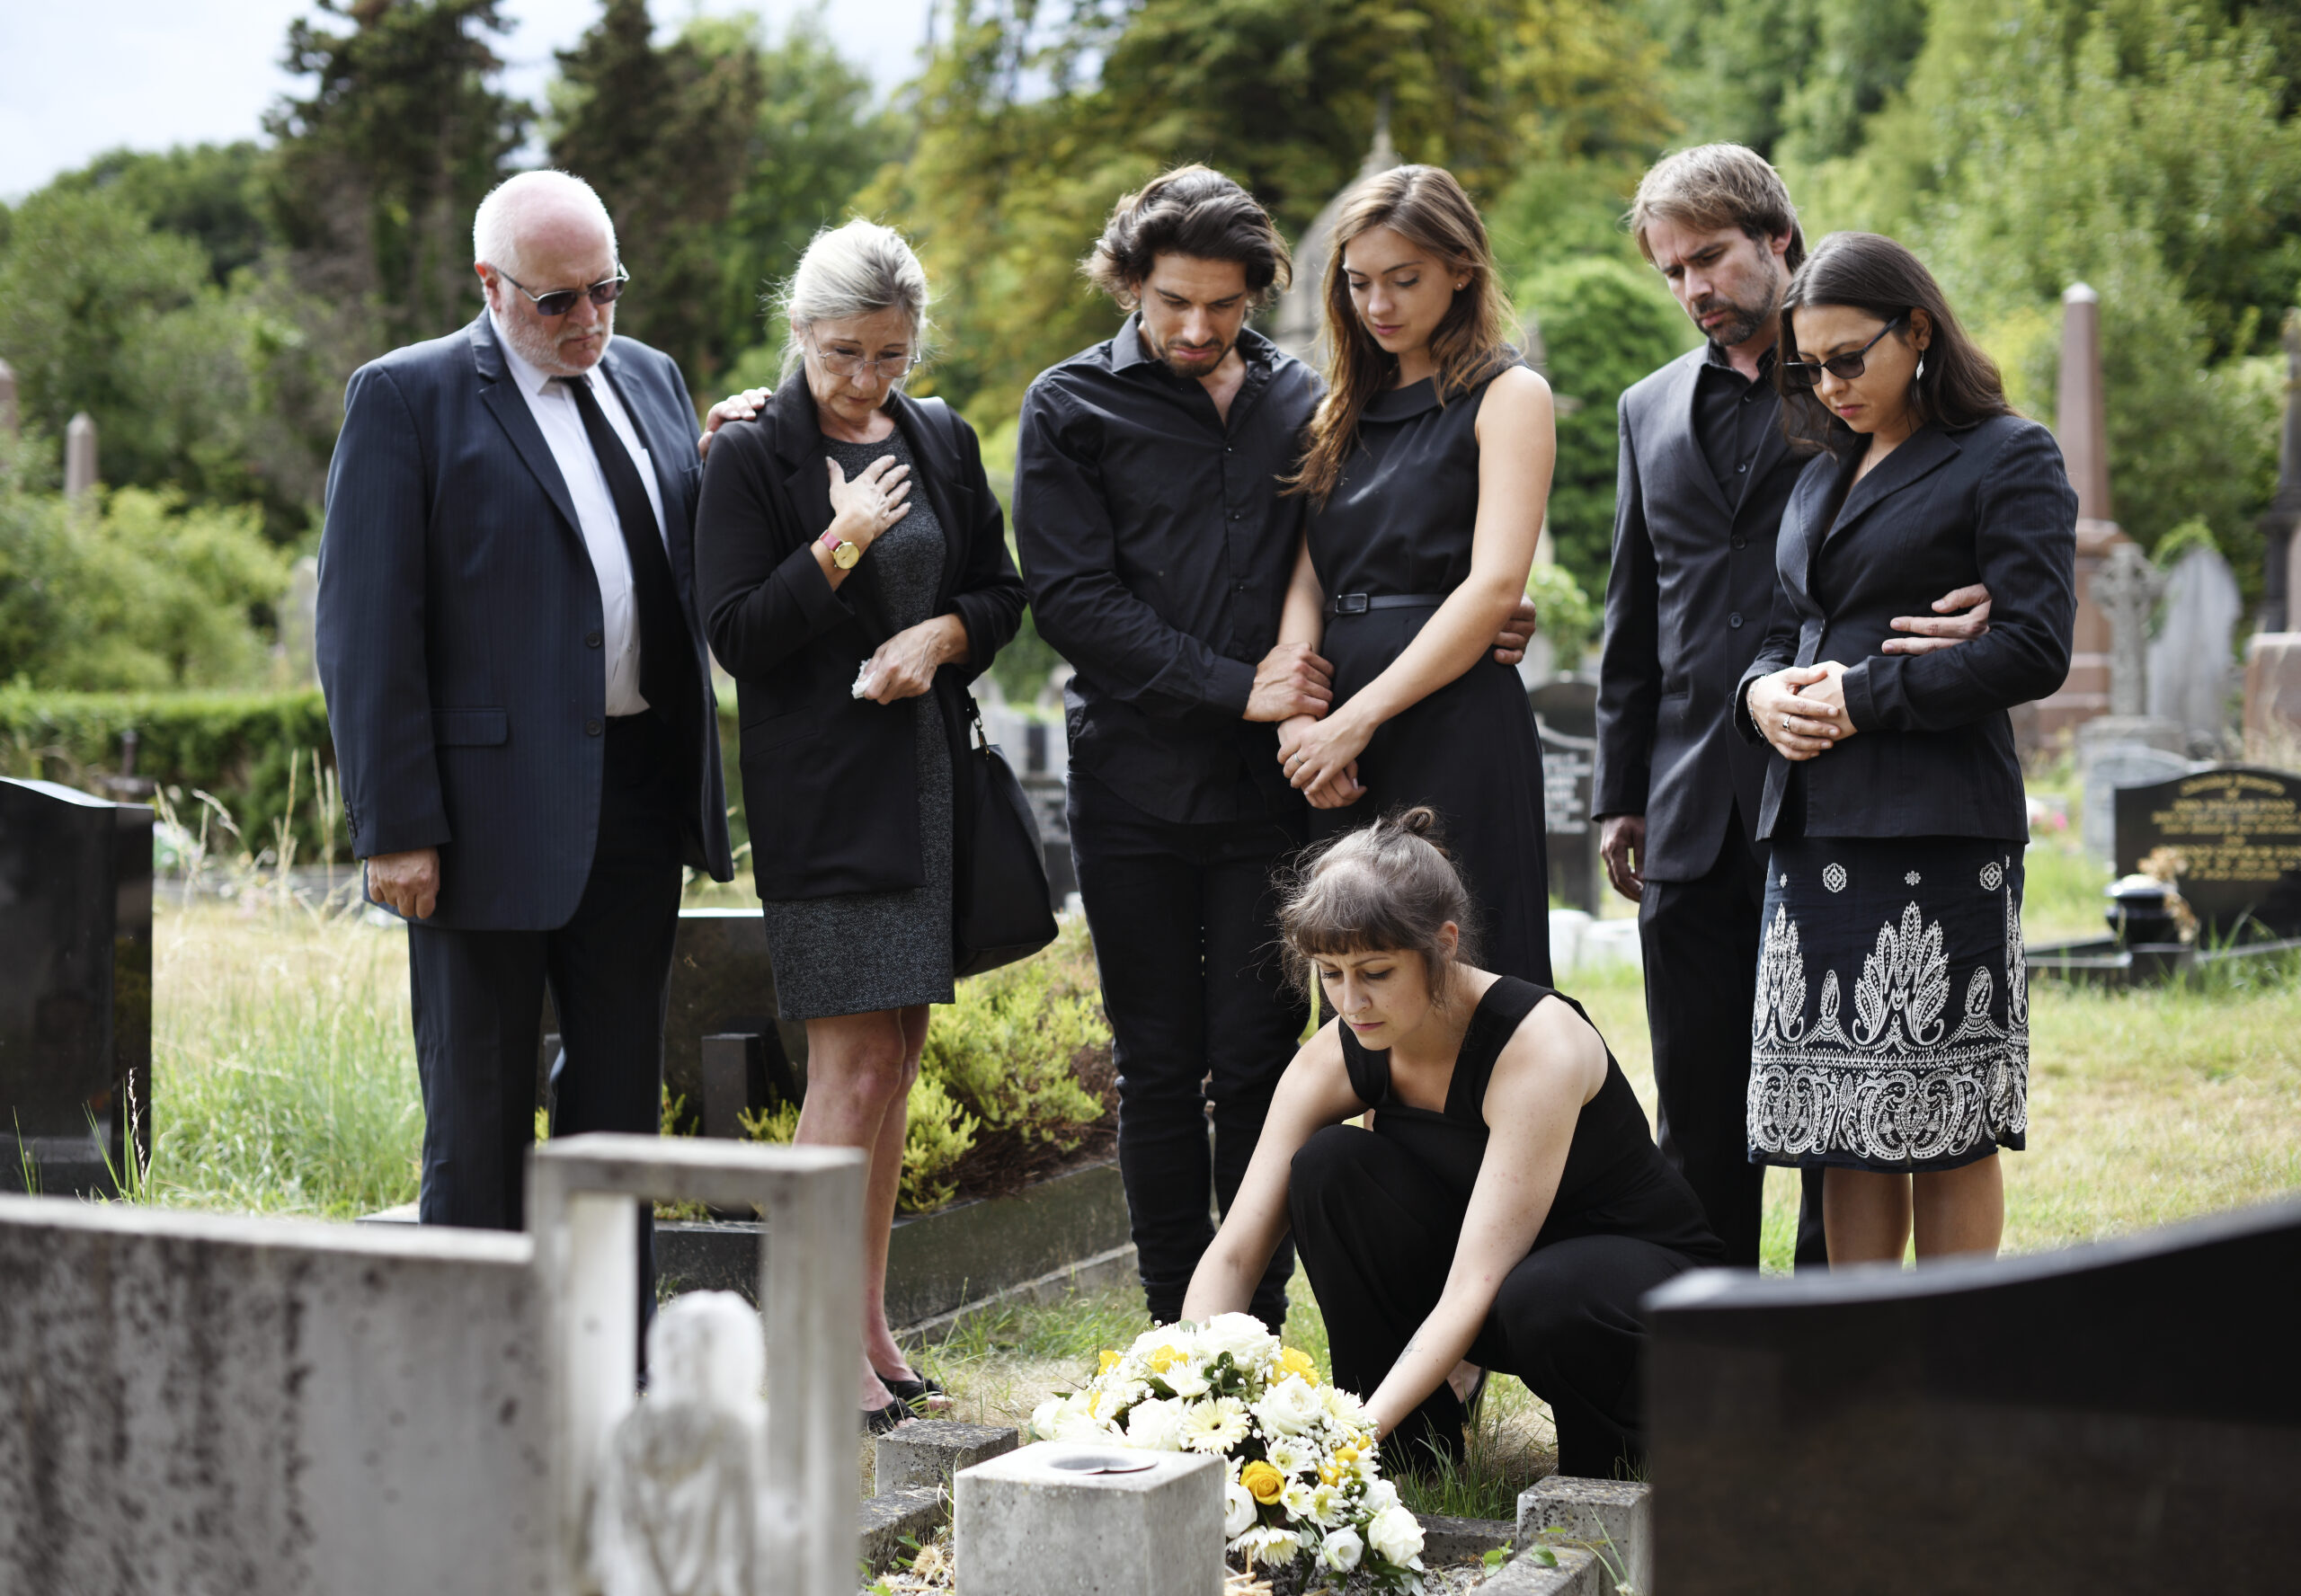 Everything You Need to Know About Funeral Services and How to Plan Them